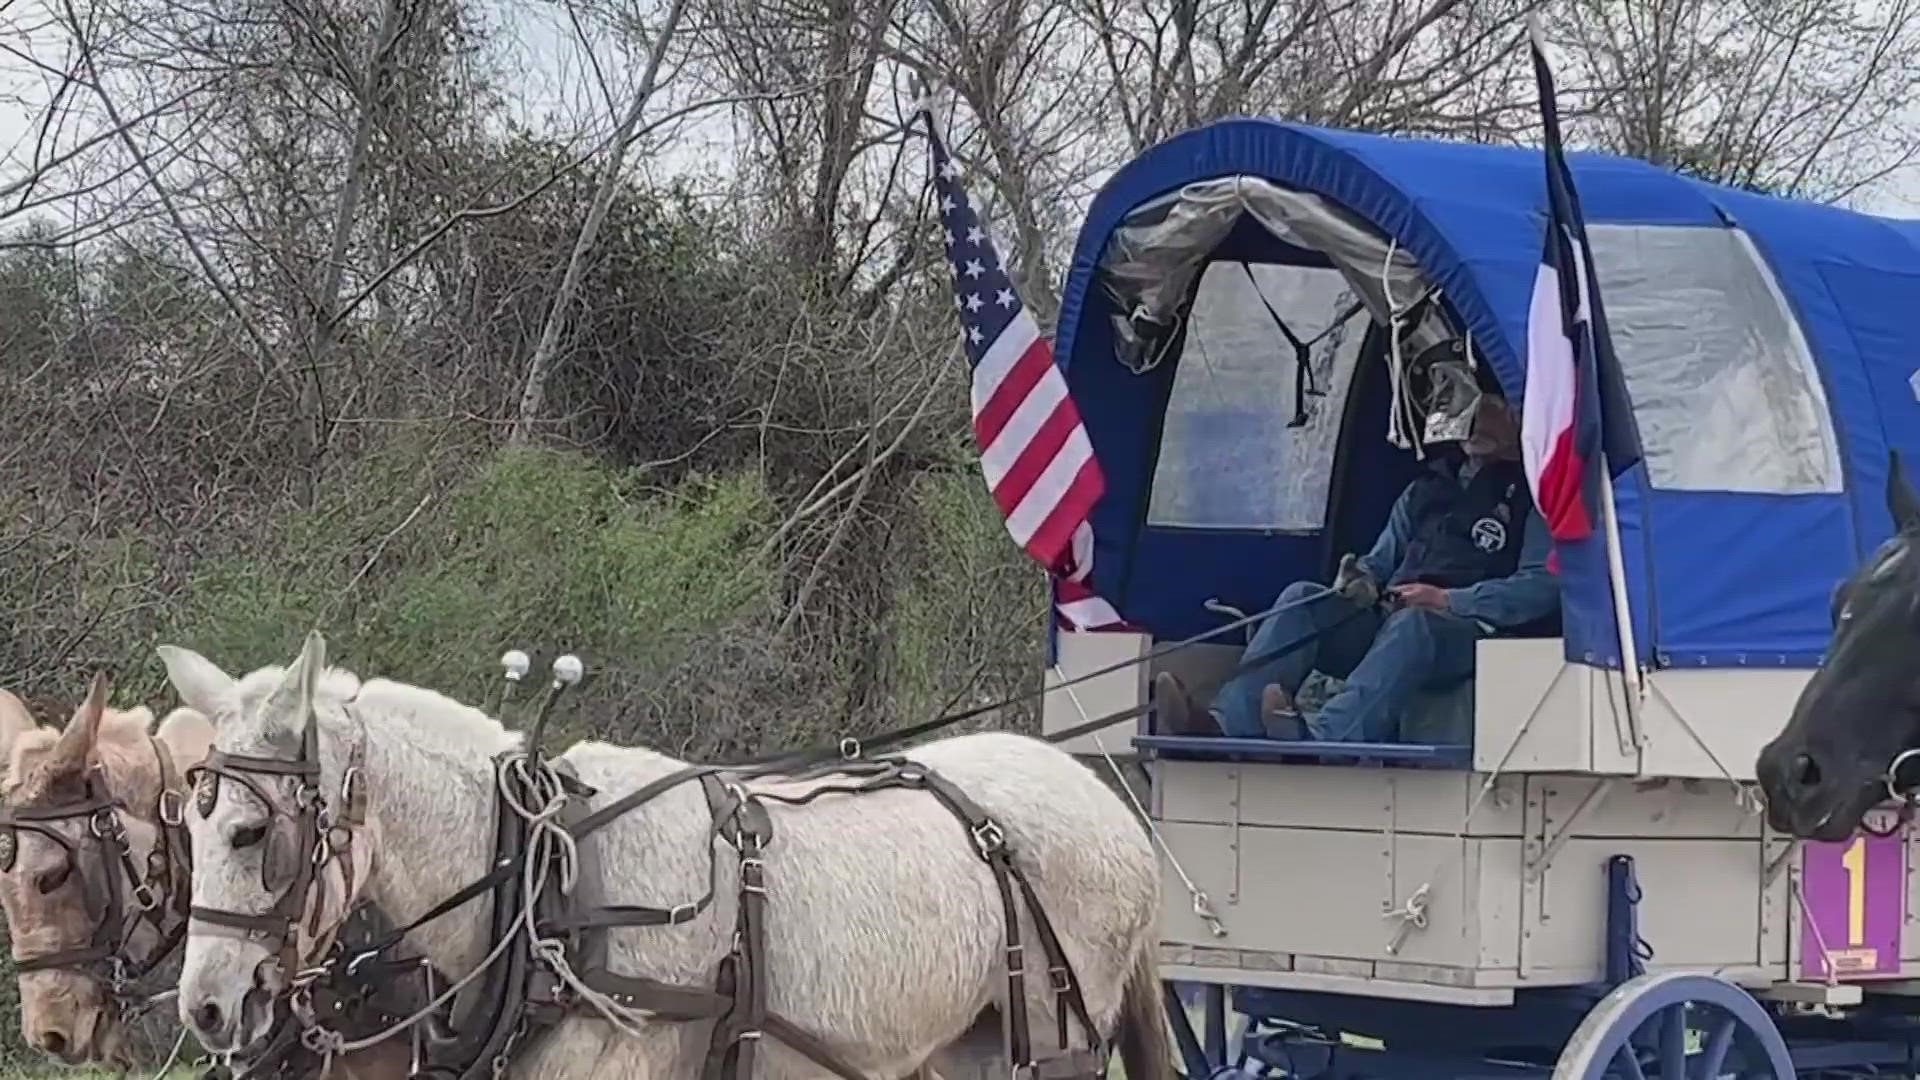 The Prairie View Trail Ride is the oldest Black trail ride for the Houston rodeo, holding 66 years strong. Brandi Smith caught up with the son of one of the founders